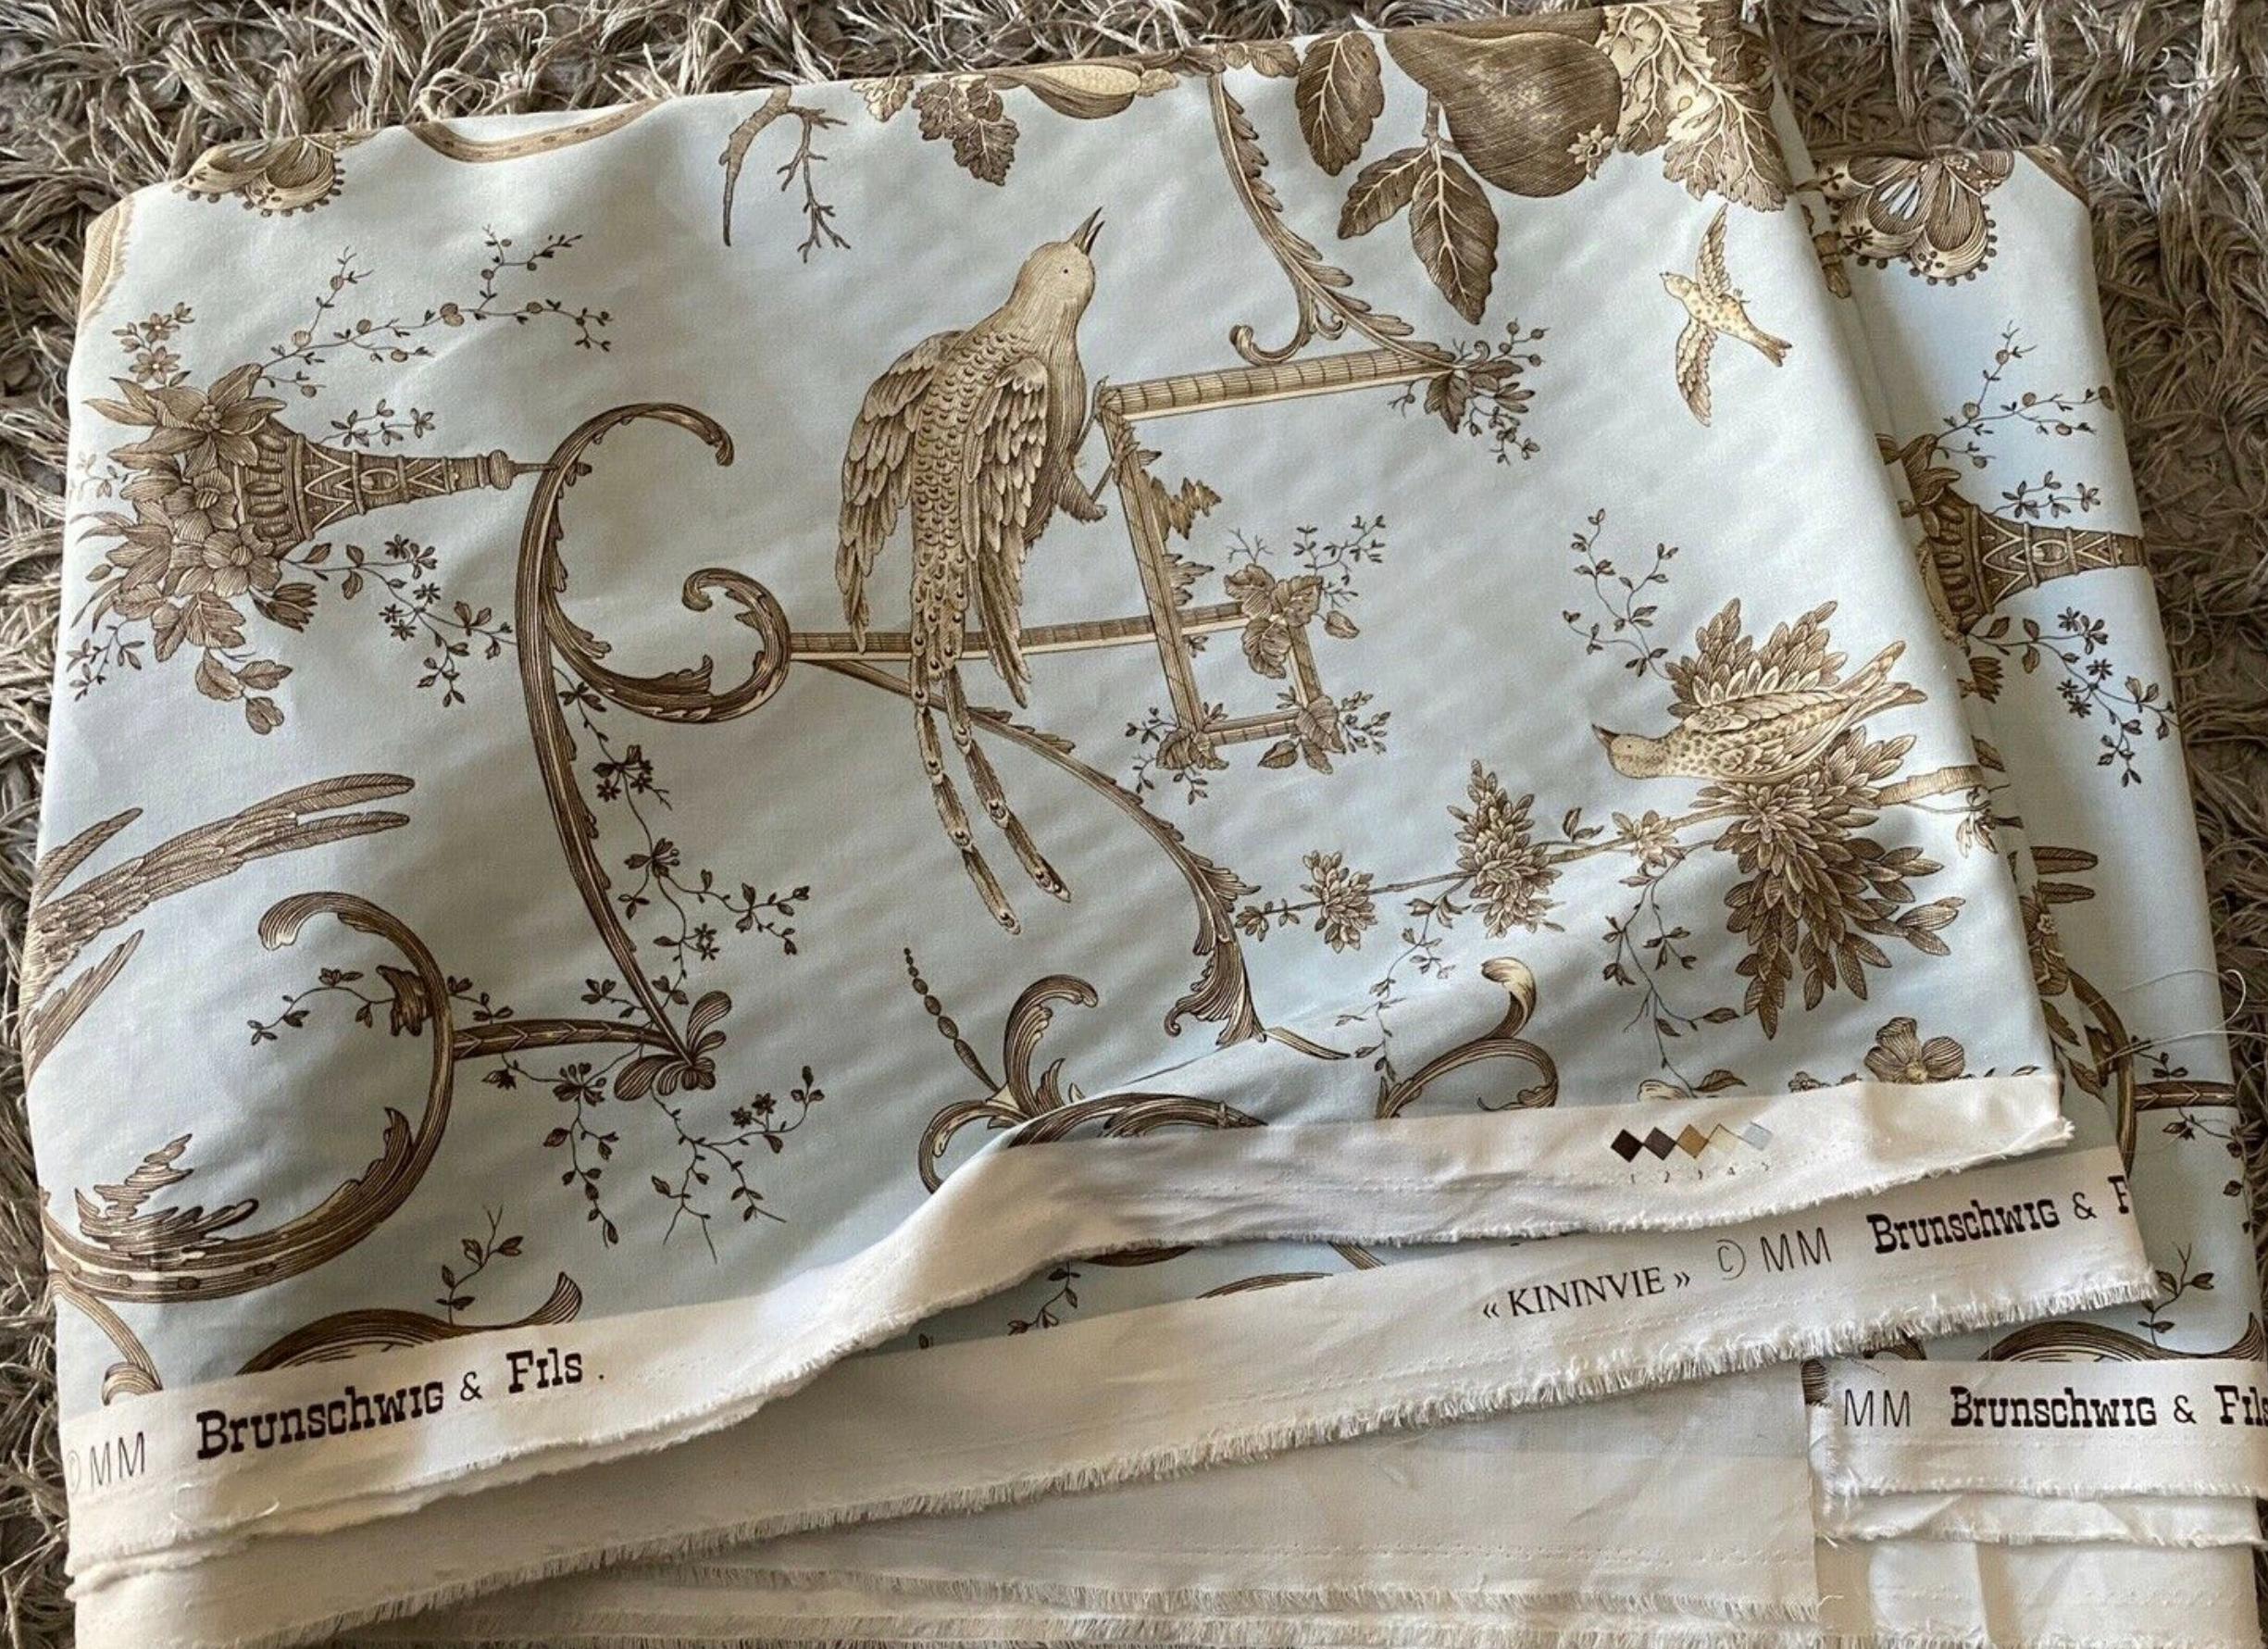 Brunschwig & Fils hand-printed Kininvie neoclassical cotton textile, robin’s egg blue, 2000. Iconic historical print from the venerable textile house of Brunschwig & Fils. Based on an English copperplate design that dates back to 1789. Made in